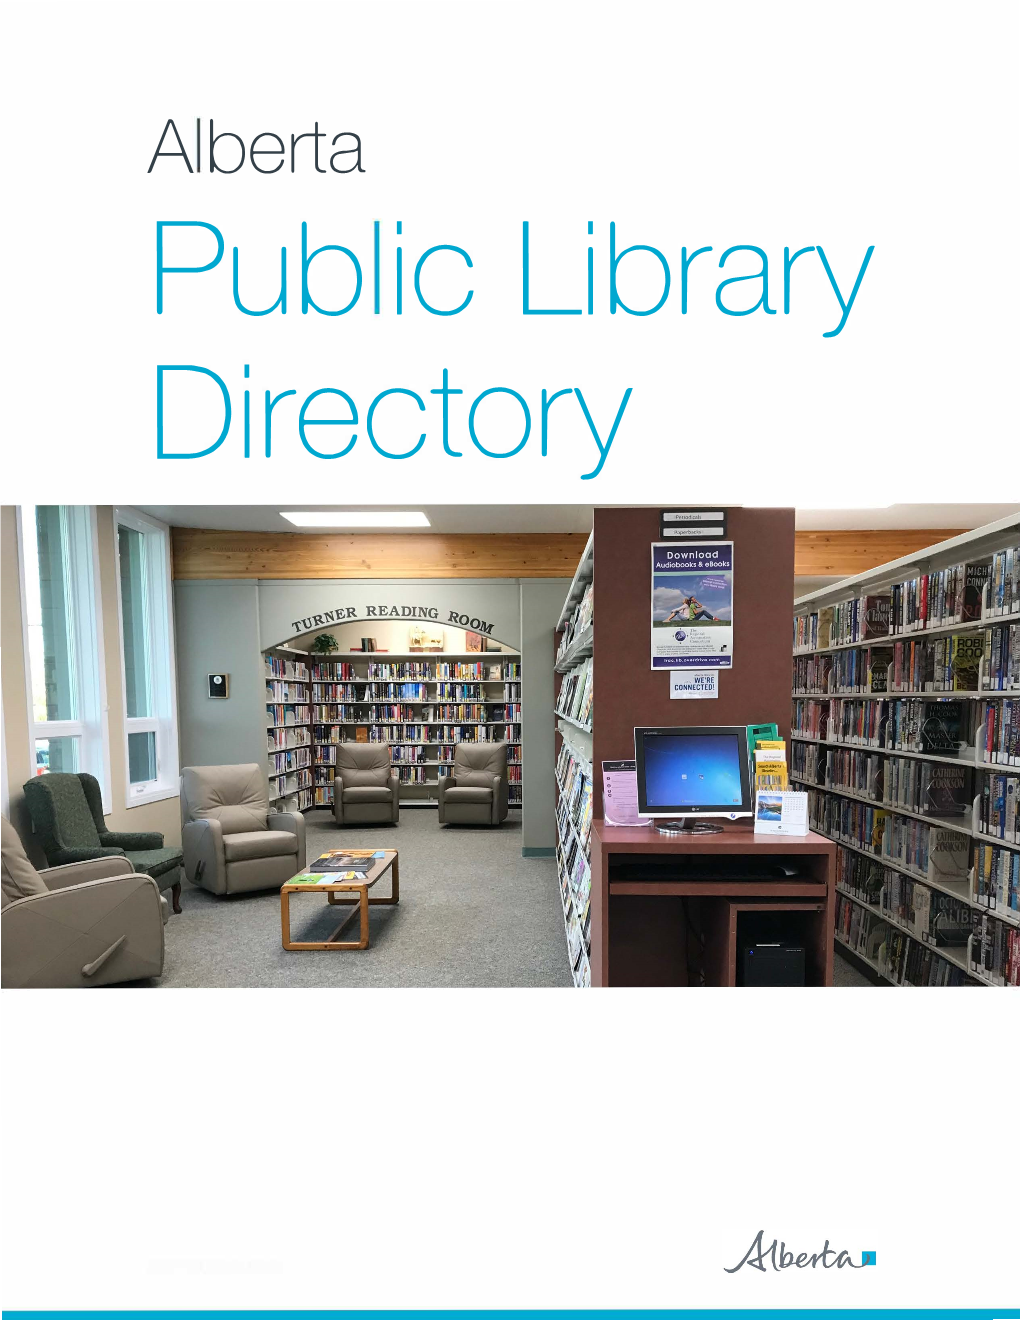 Alberta Public Library Directory Is Produced Annually by Alberta Municipal Affairs, Public Library Services Branch